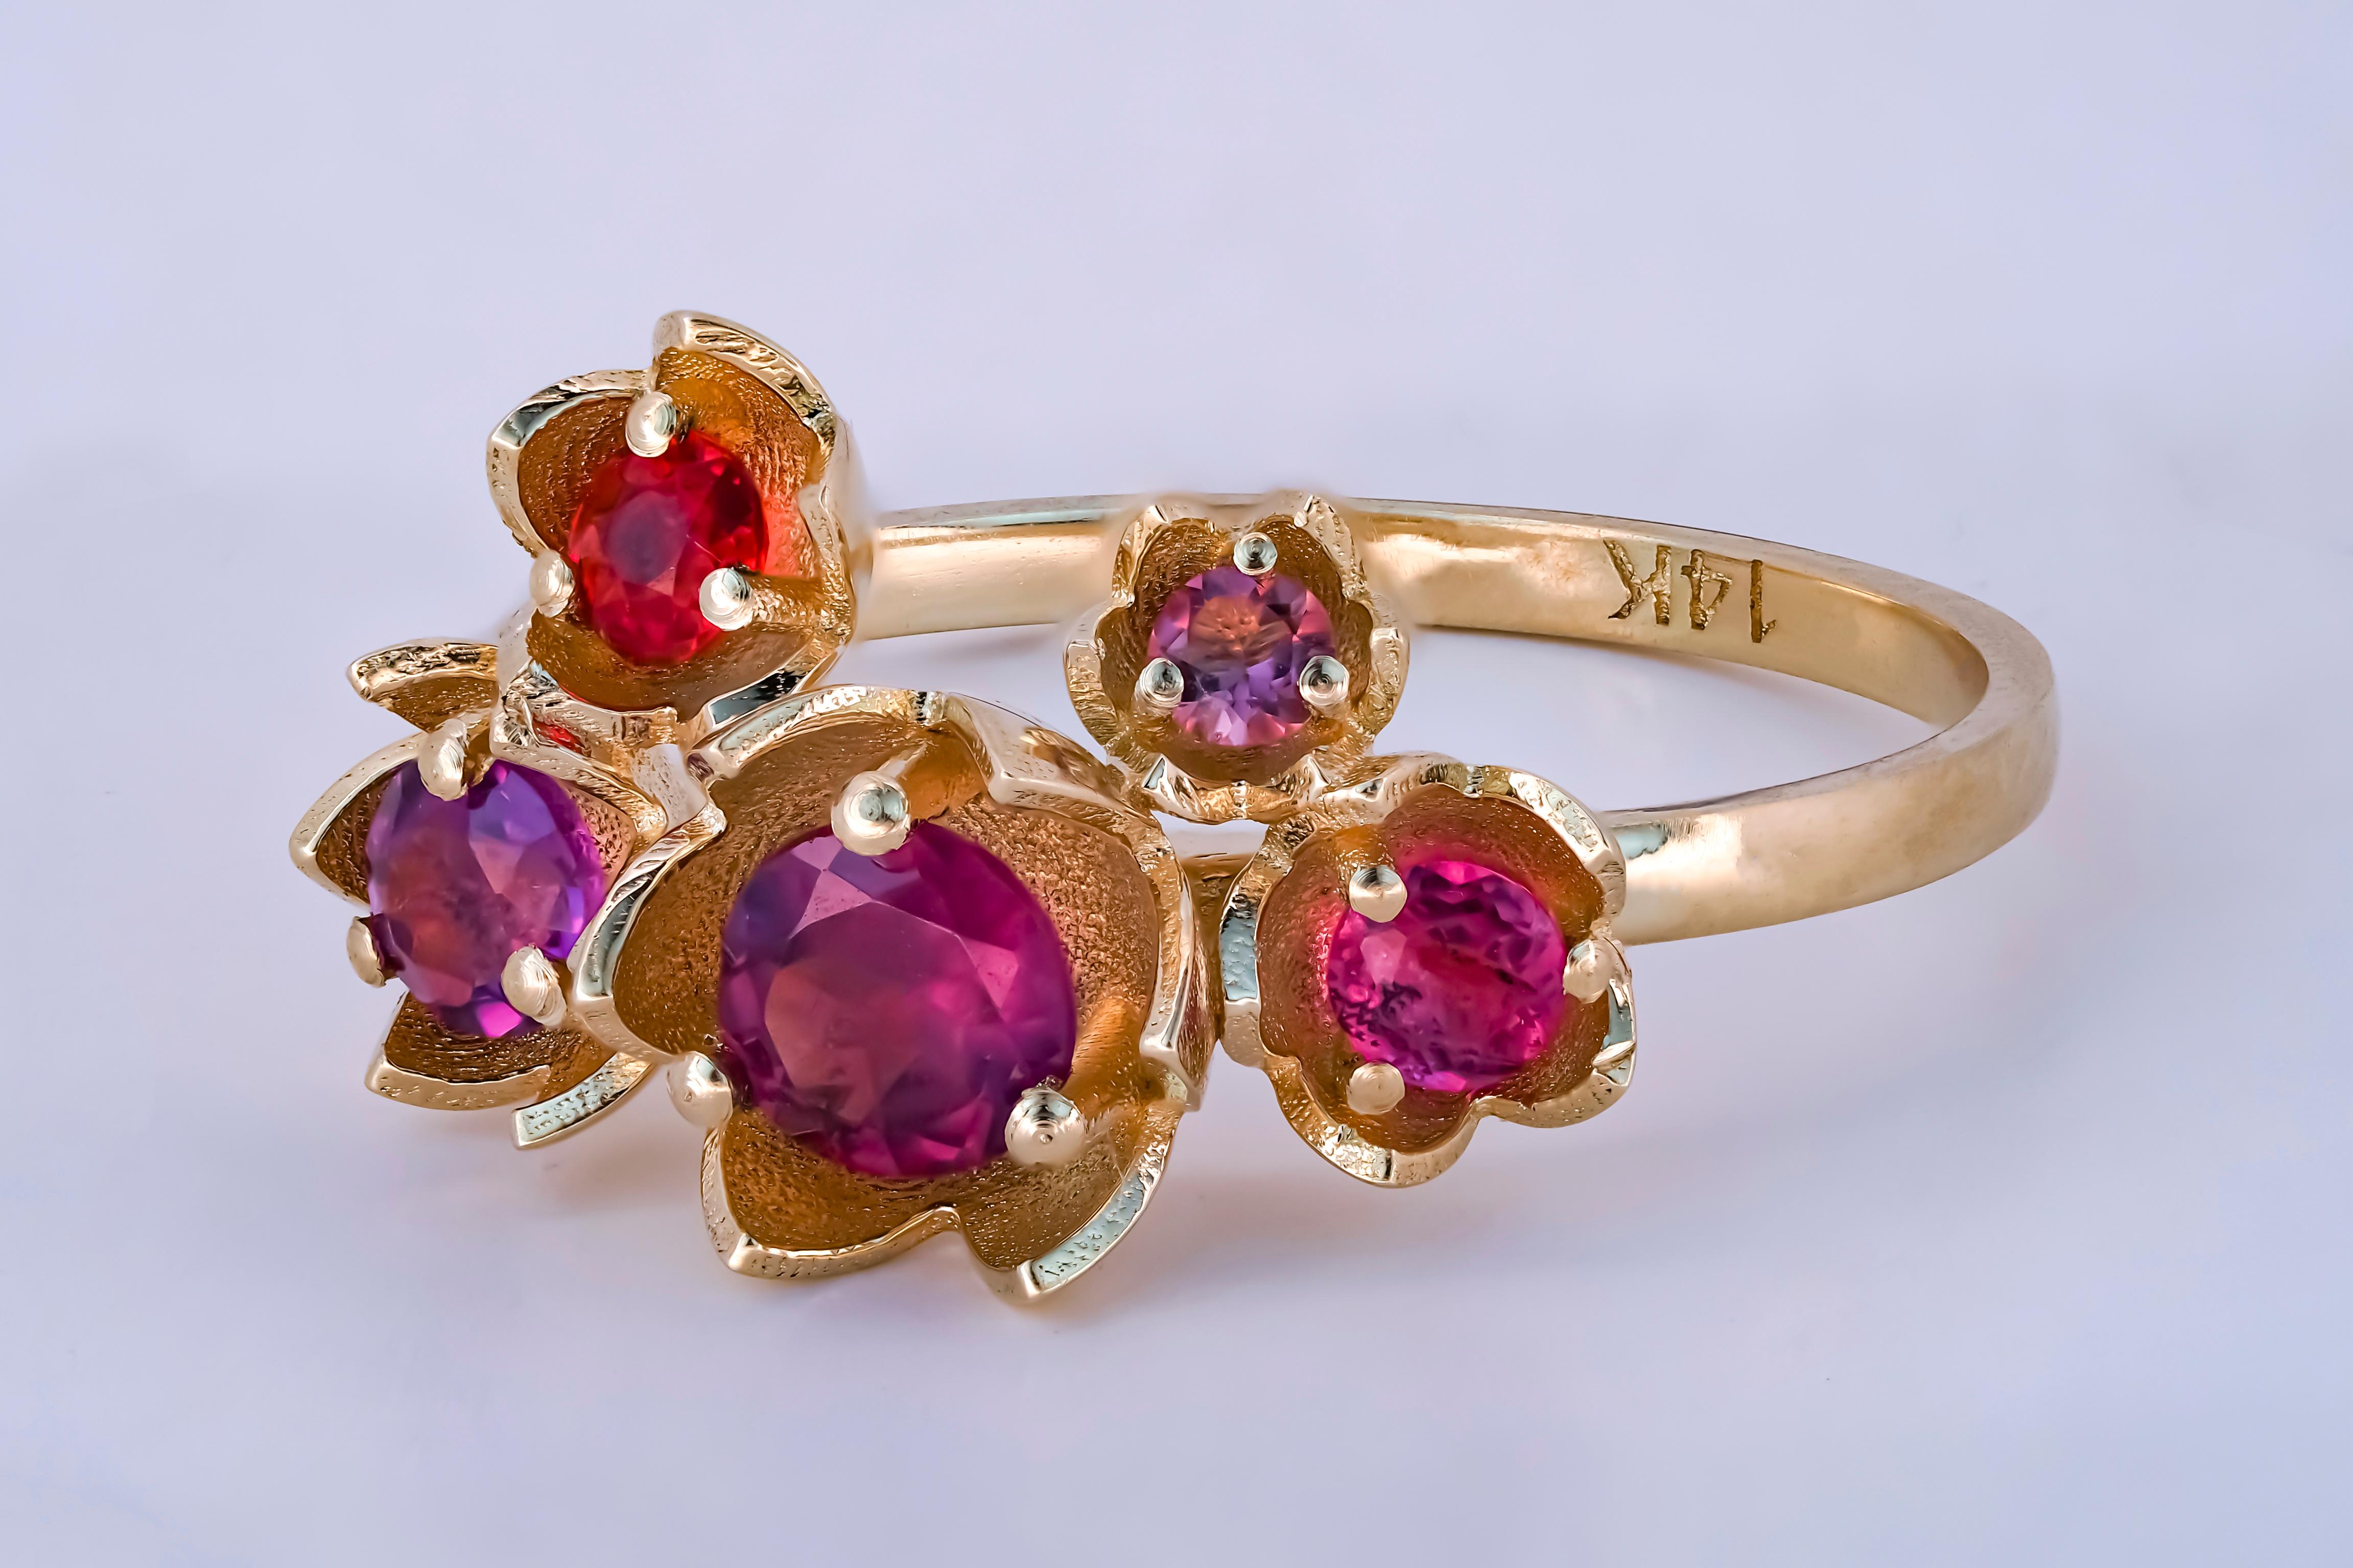 14 karat gold Blossom ring with pink gemstones. Flower bouquet gold ring. Pink tourmaline ring. Tourmaline, sapphires, amethyst ring
Weight: 1.8 g.
Gold - 14k gold
Central stone: tourmaline
Cut: round
Weight: aprx 0.52 ct.
Color: pink
Clarity: